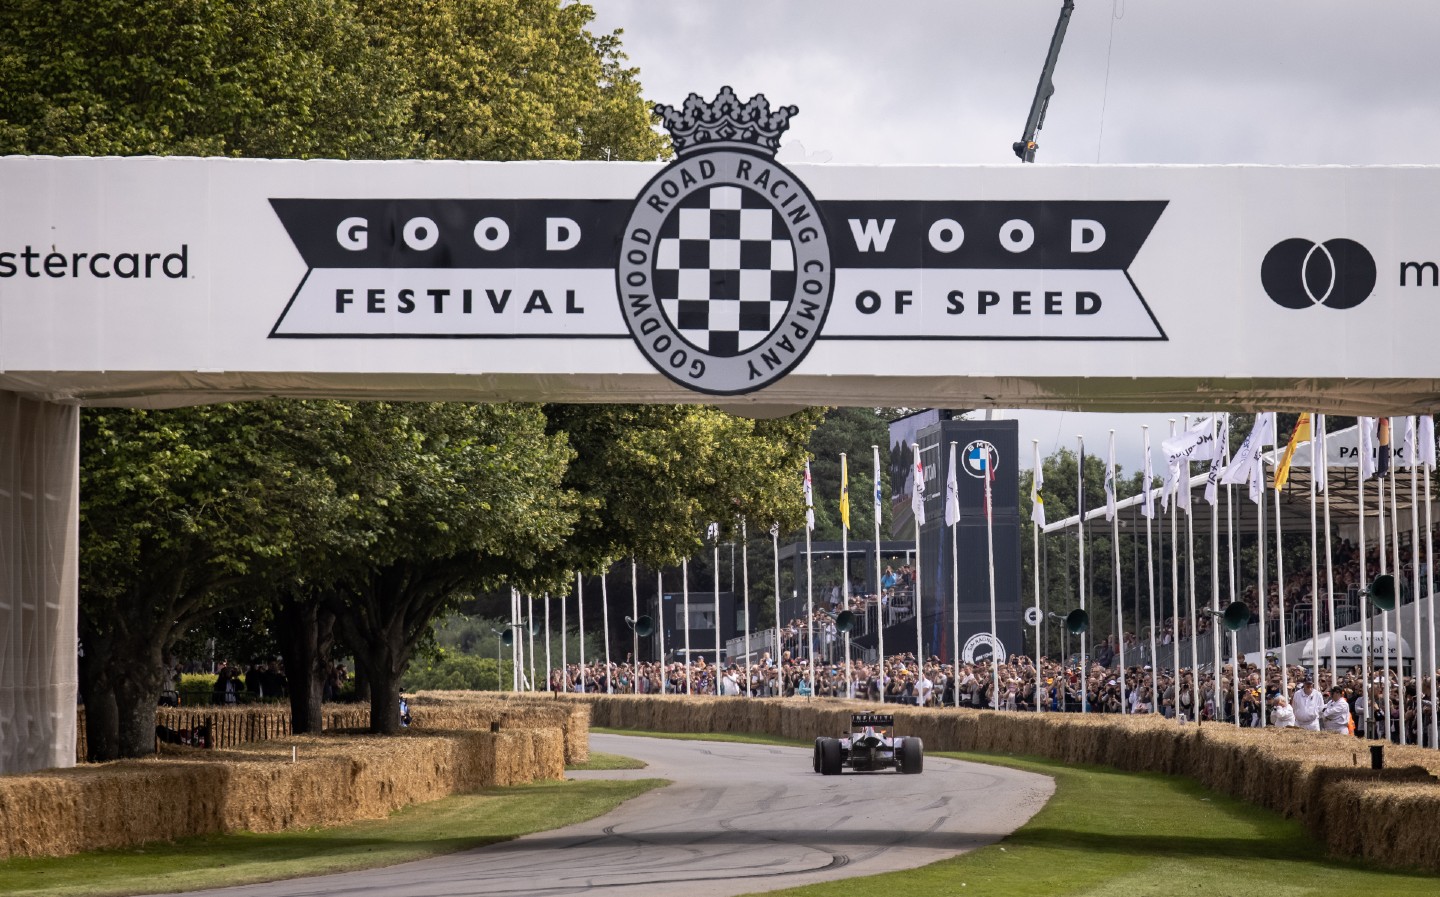 Alex Albon driving a Red Bull F1 car at Goodwood Festival of Speed 2021